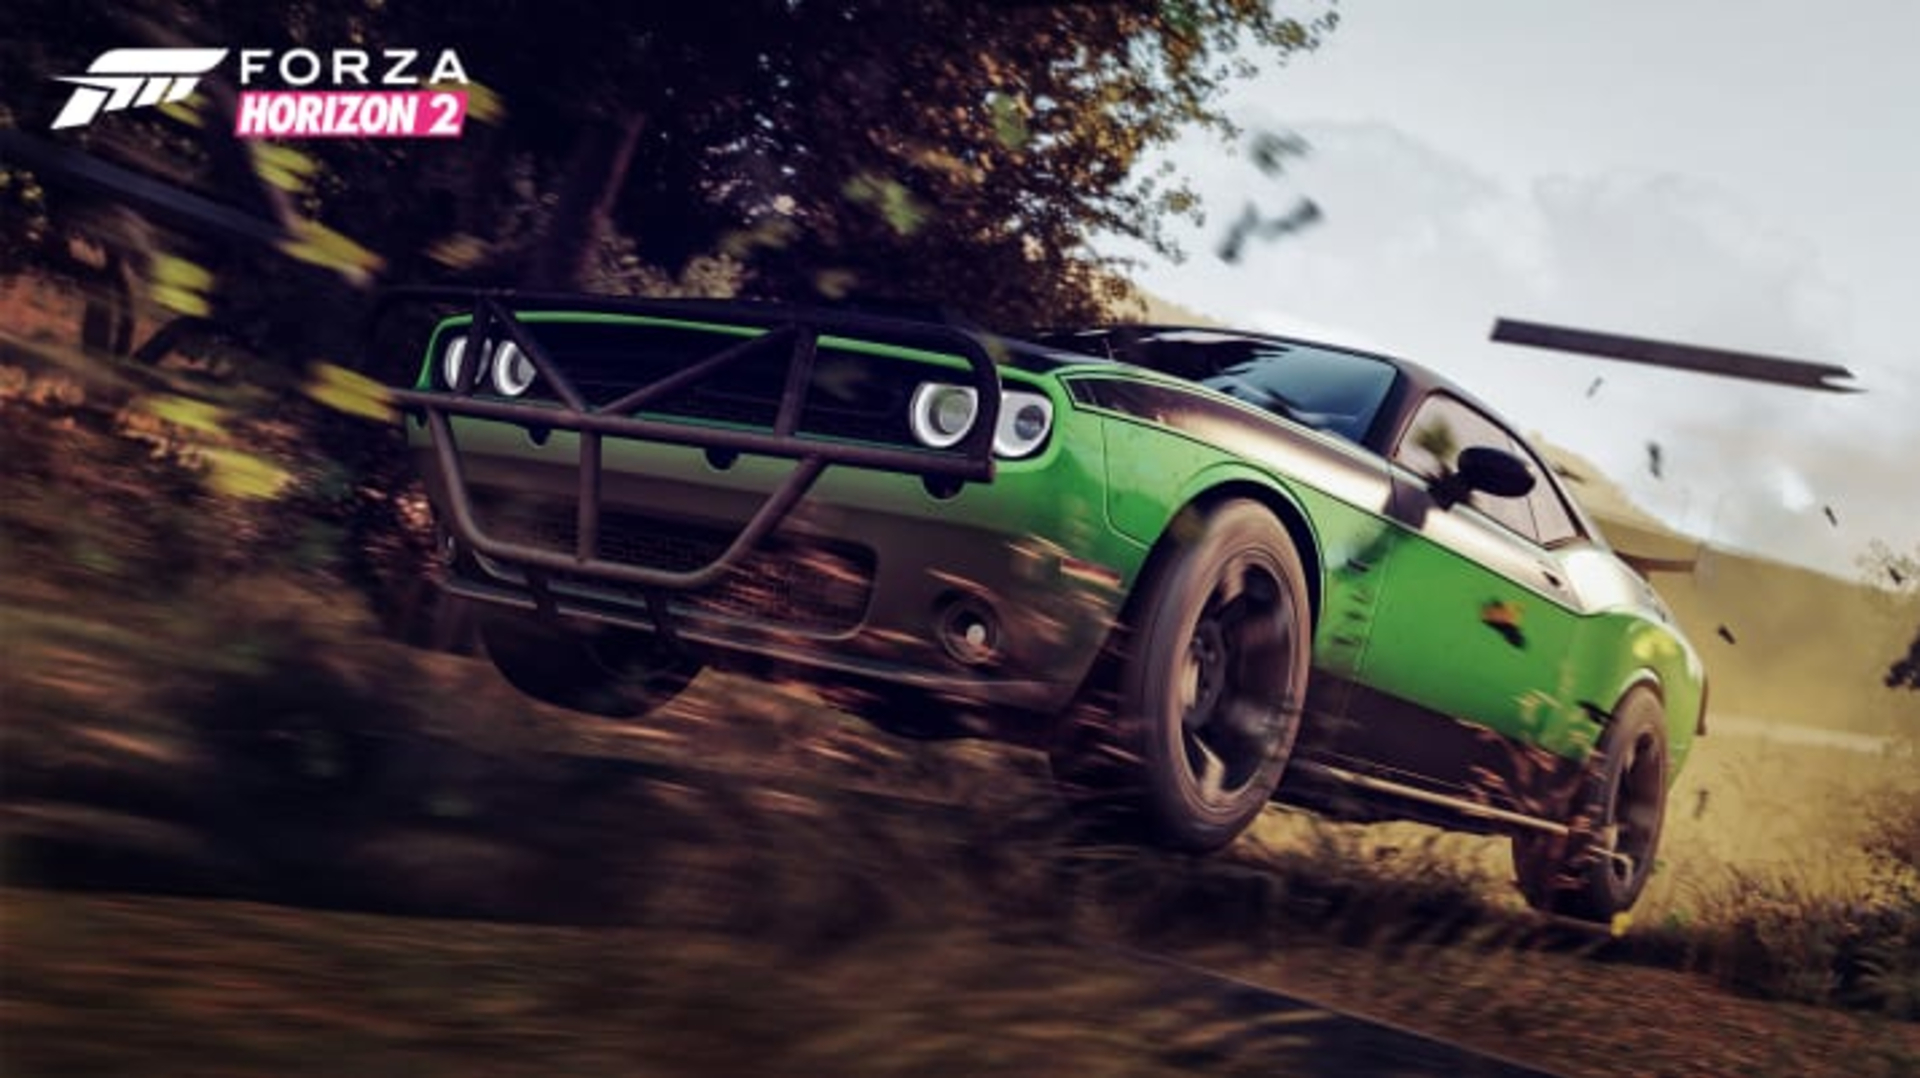 Forza Horizon 2 Presents Fast and Furious 2015 Dodge Challenger R/T